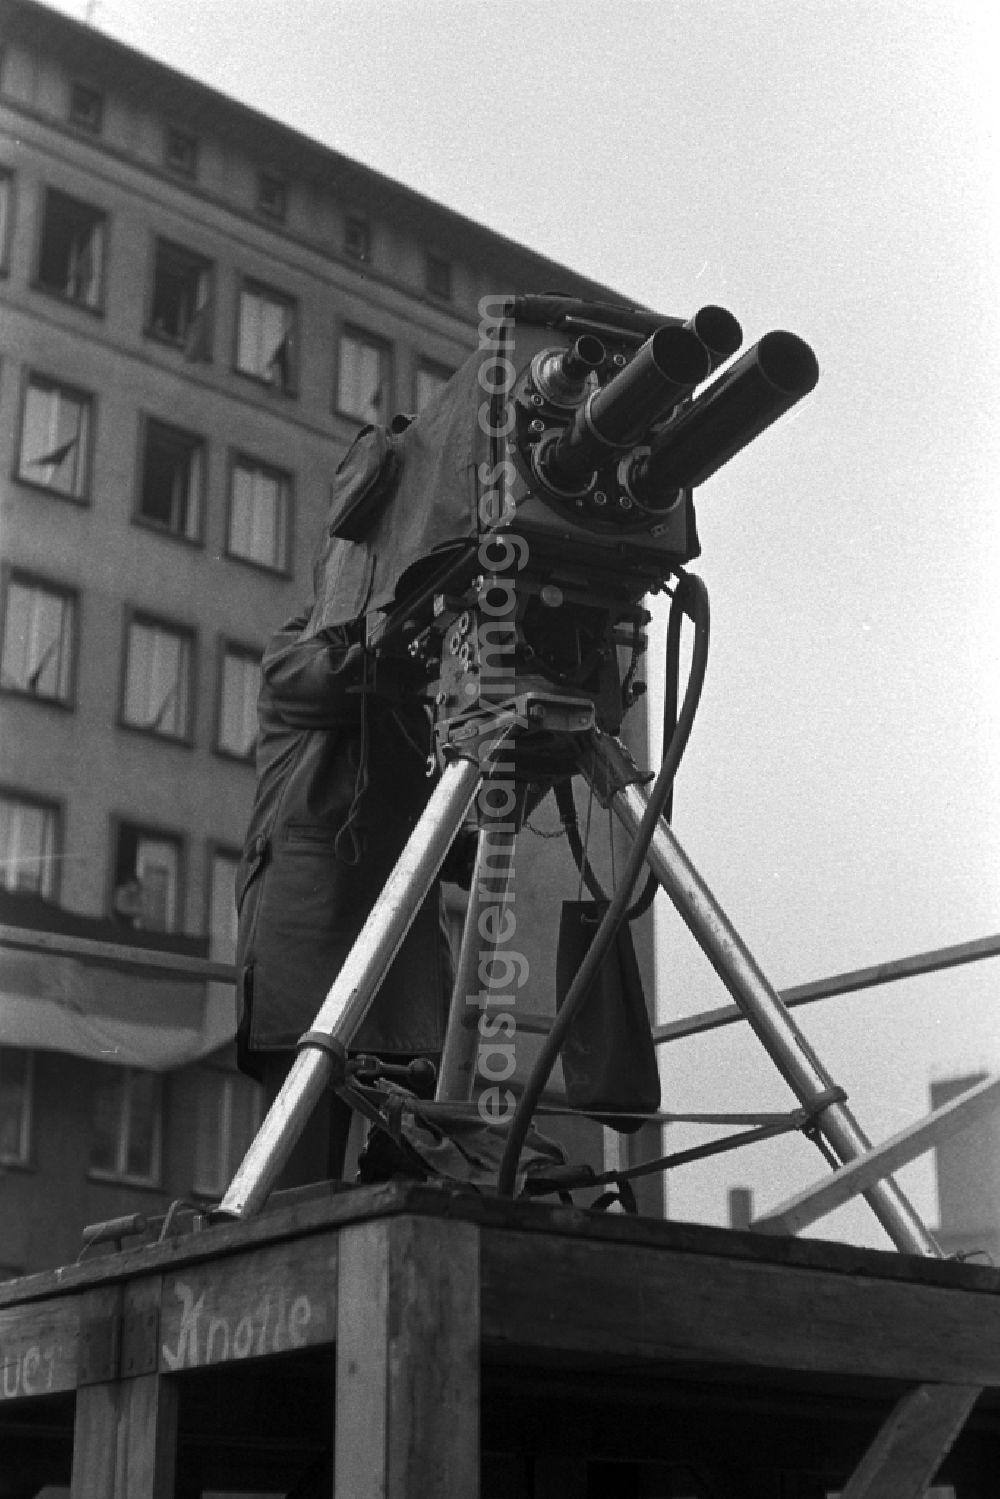 GDR photo archive: Magdeburg - Camera man on a wooden platform with a KIO television camera in Magdeburg. The KIO was the first commercially successful German television camera